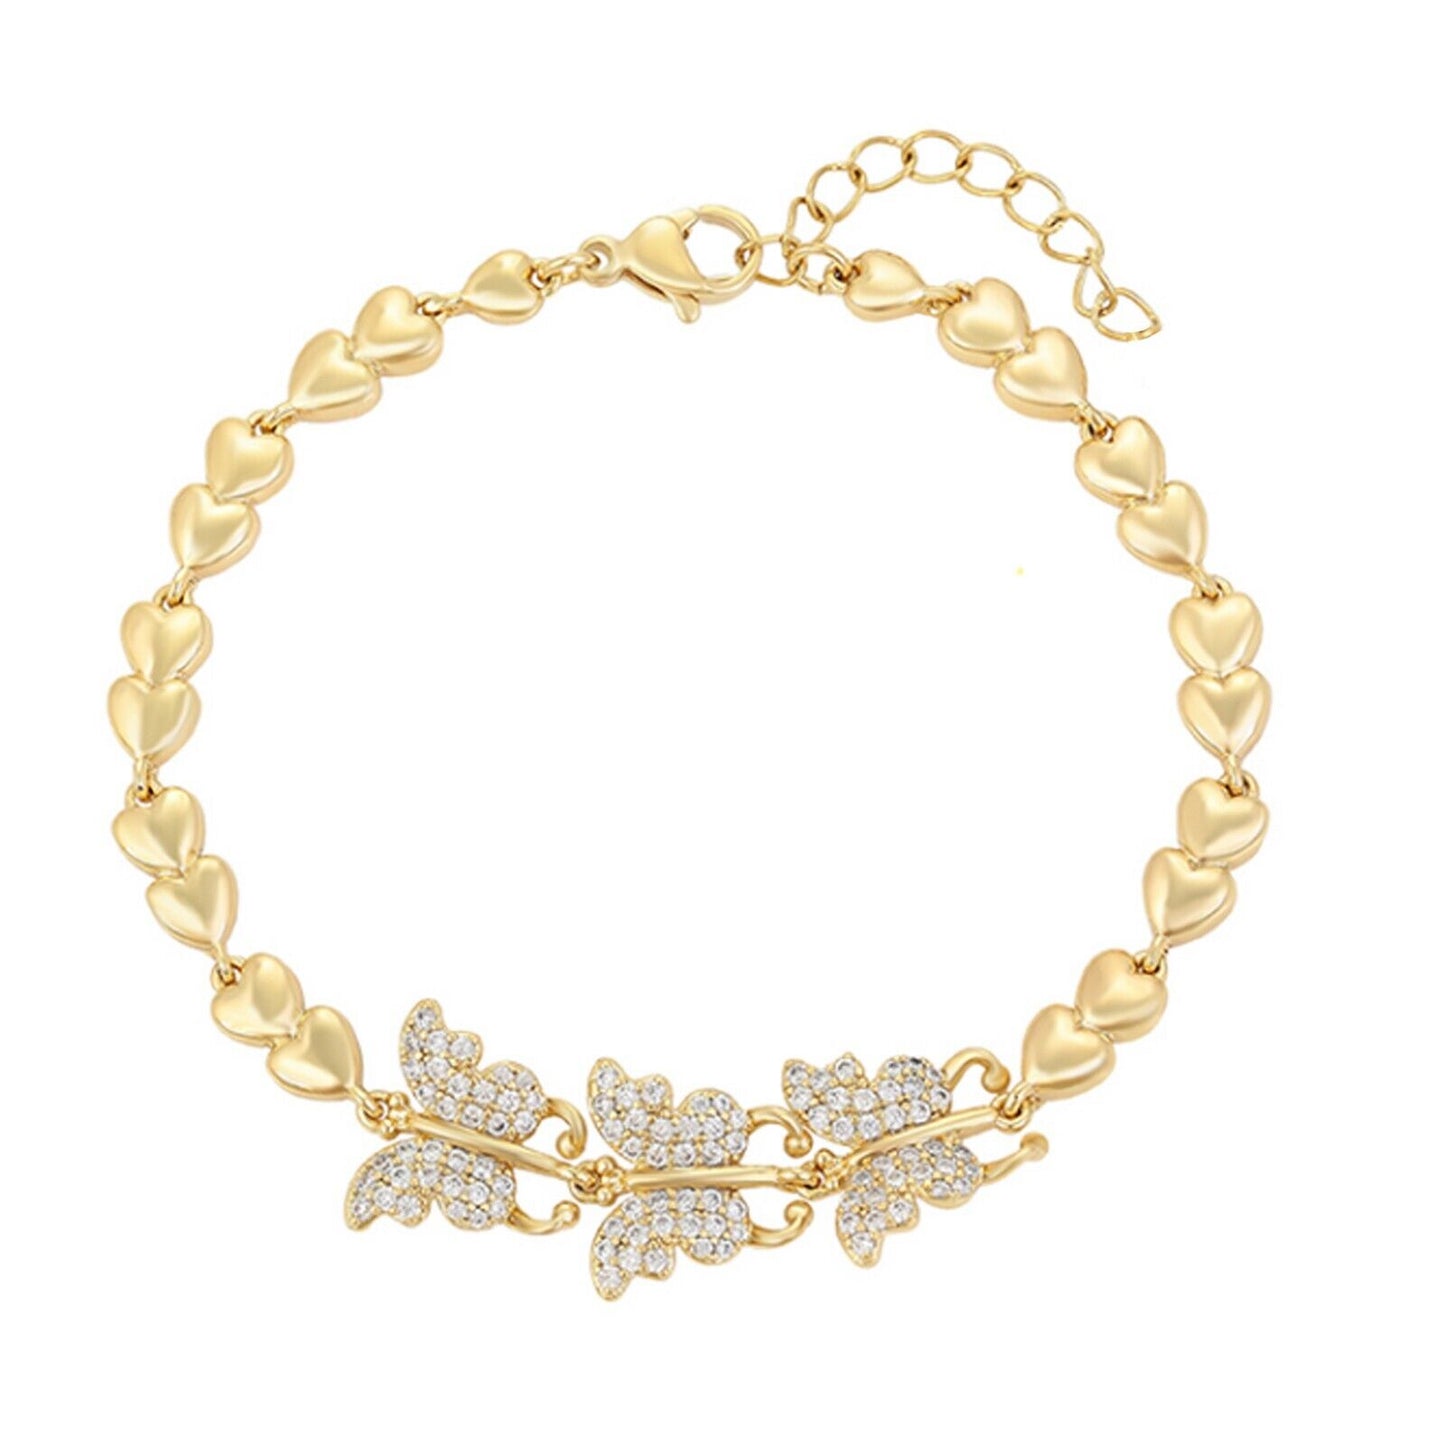 Bracelets - 14K Gold Plated. 3 Butterflies Icy Crystals Bracelet. Hearts chains